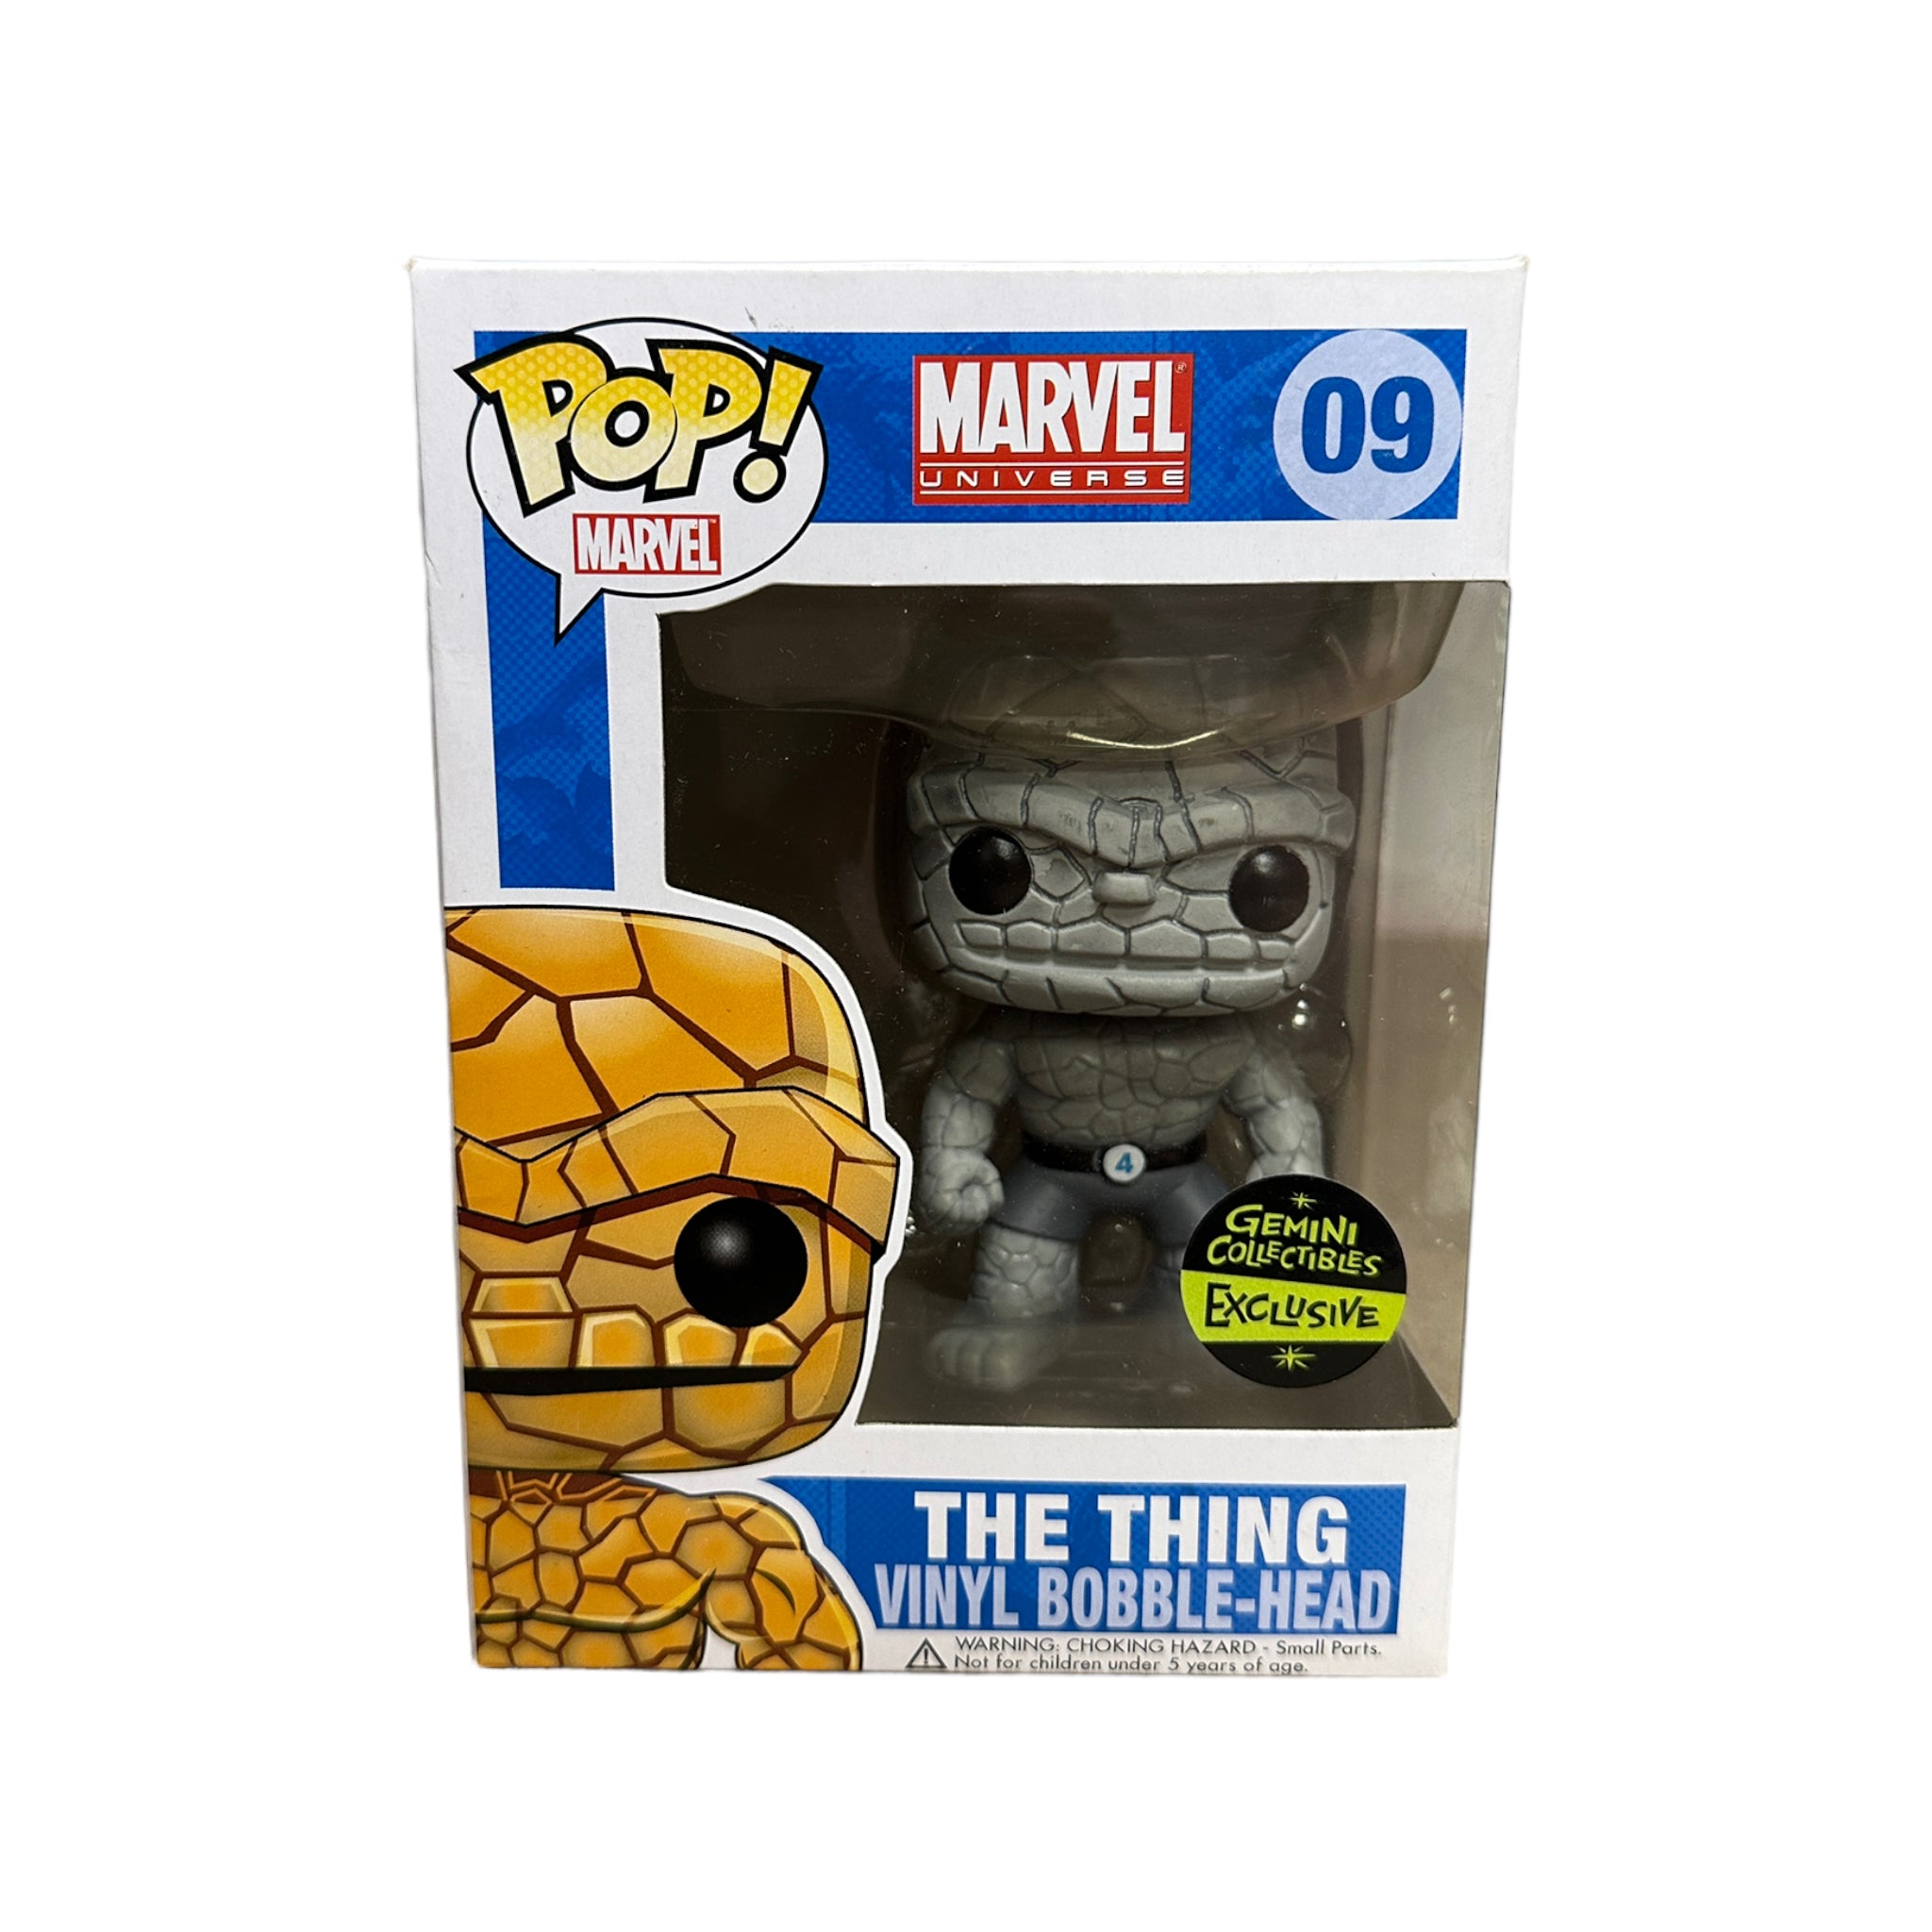 The Thing #09 (Black and White) Funko Pop! - Marvel Universe - Gemini Collectibles Exclusive - Condition 7.5/10